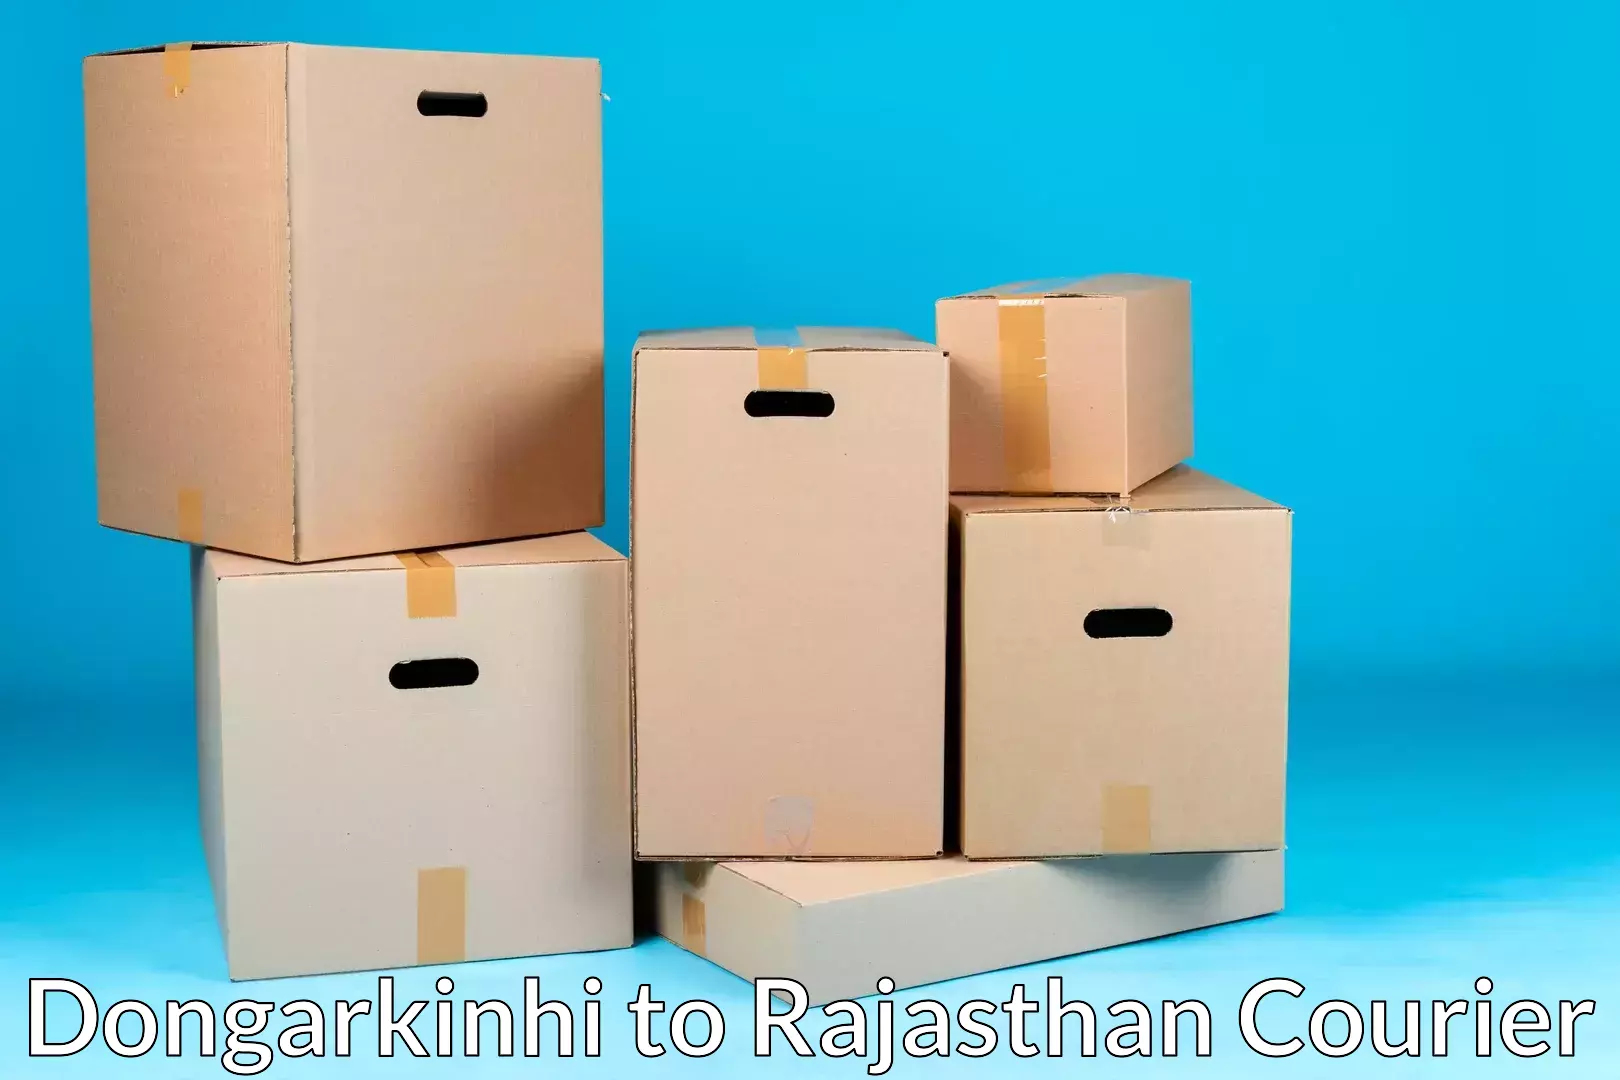 Trusted moving company Dongarkinhi to Rajasthan